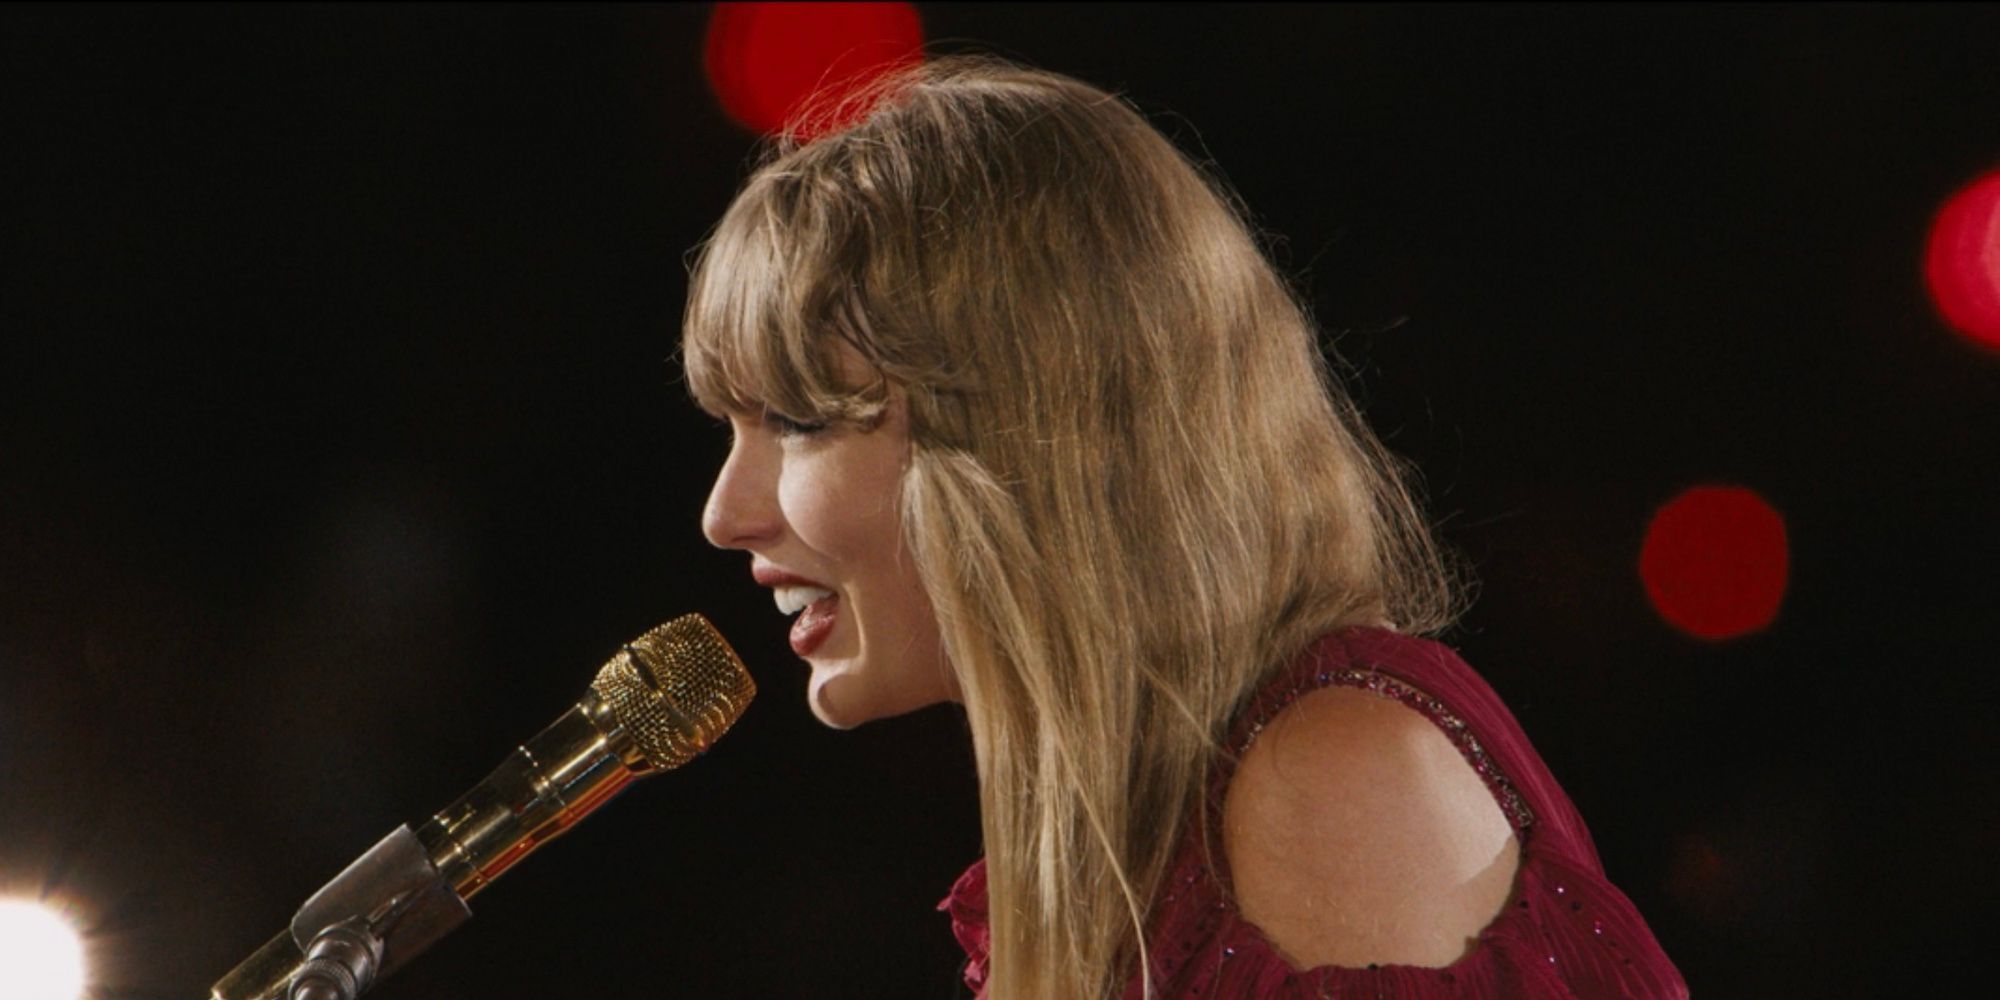 Taylor Swift performs "Maroon" in The Eras Tour movie.